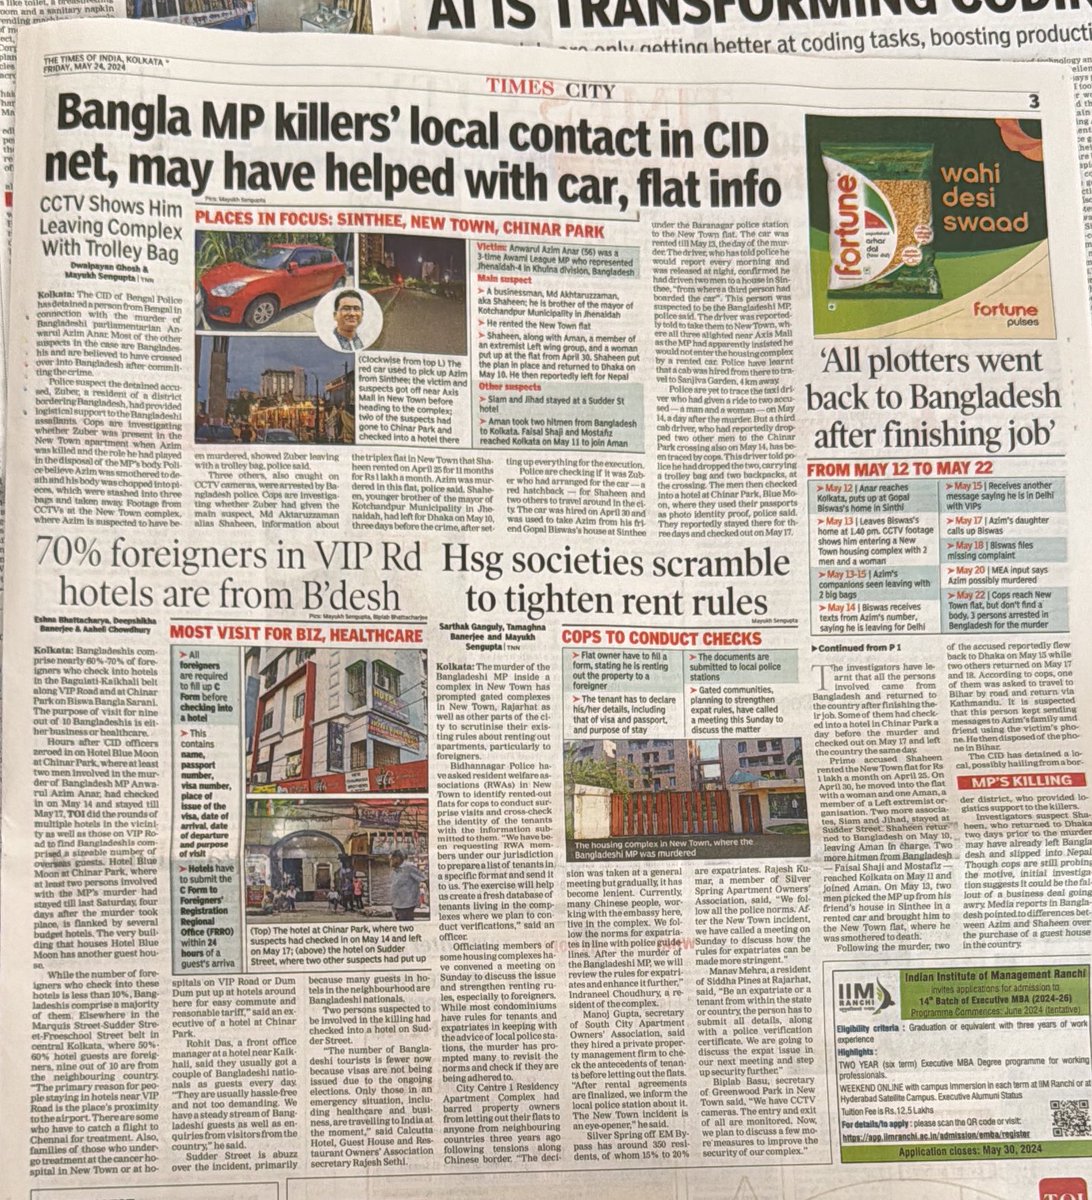 70% foreigners in hotels around Kolkata airport are Bangladeshi. And they committing worst crimes here even killing their own MP brutally. This is a direct fallout of TMC govt going soft on them